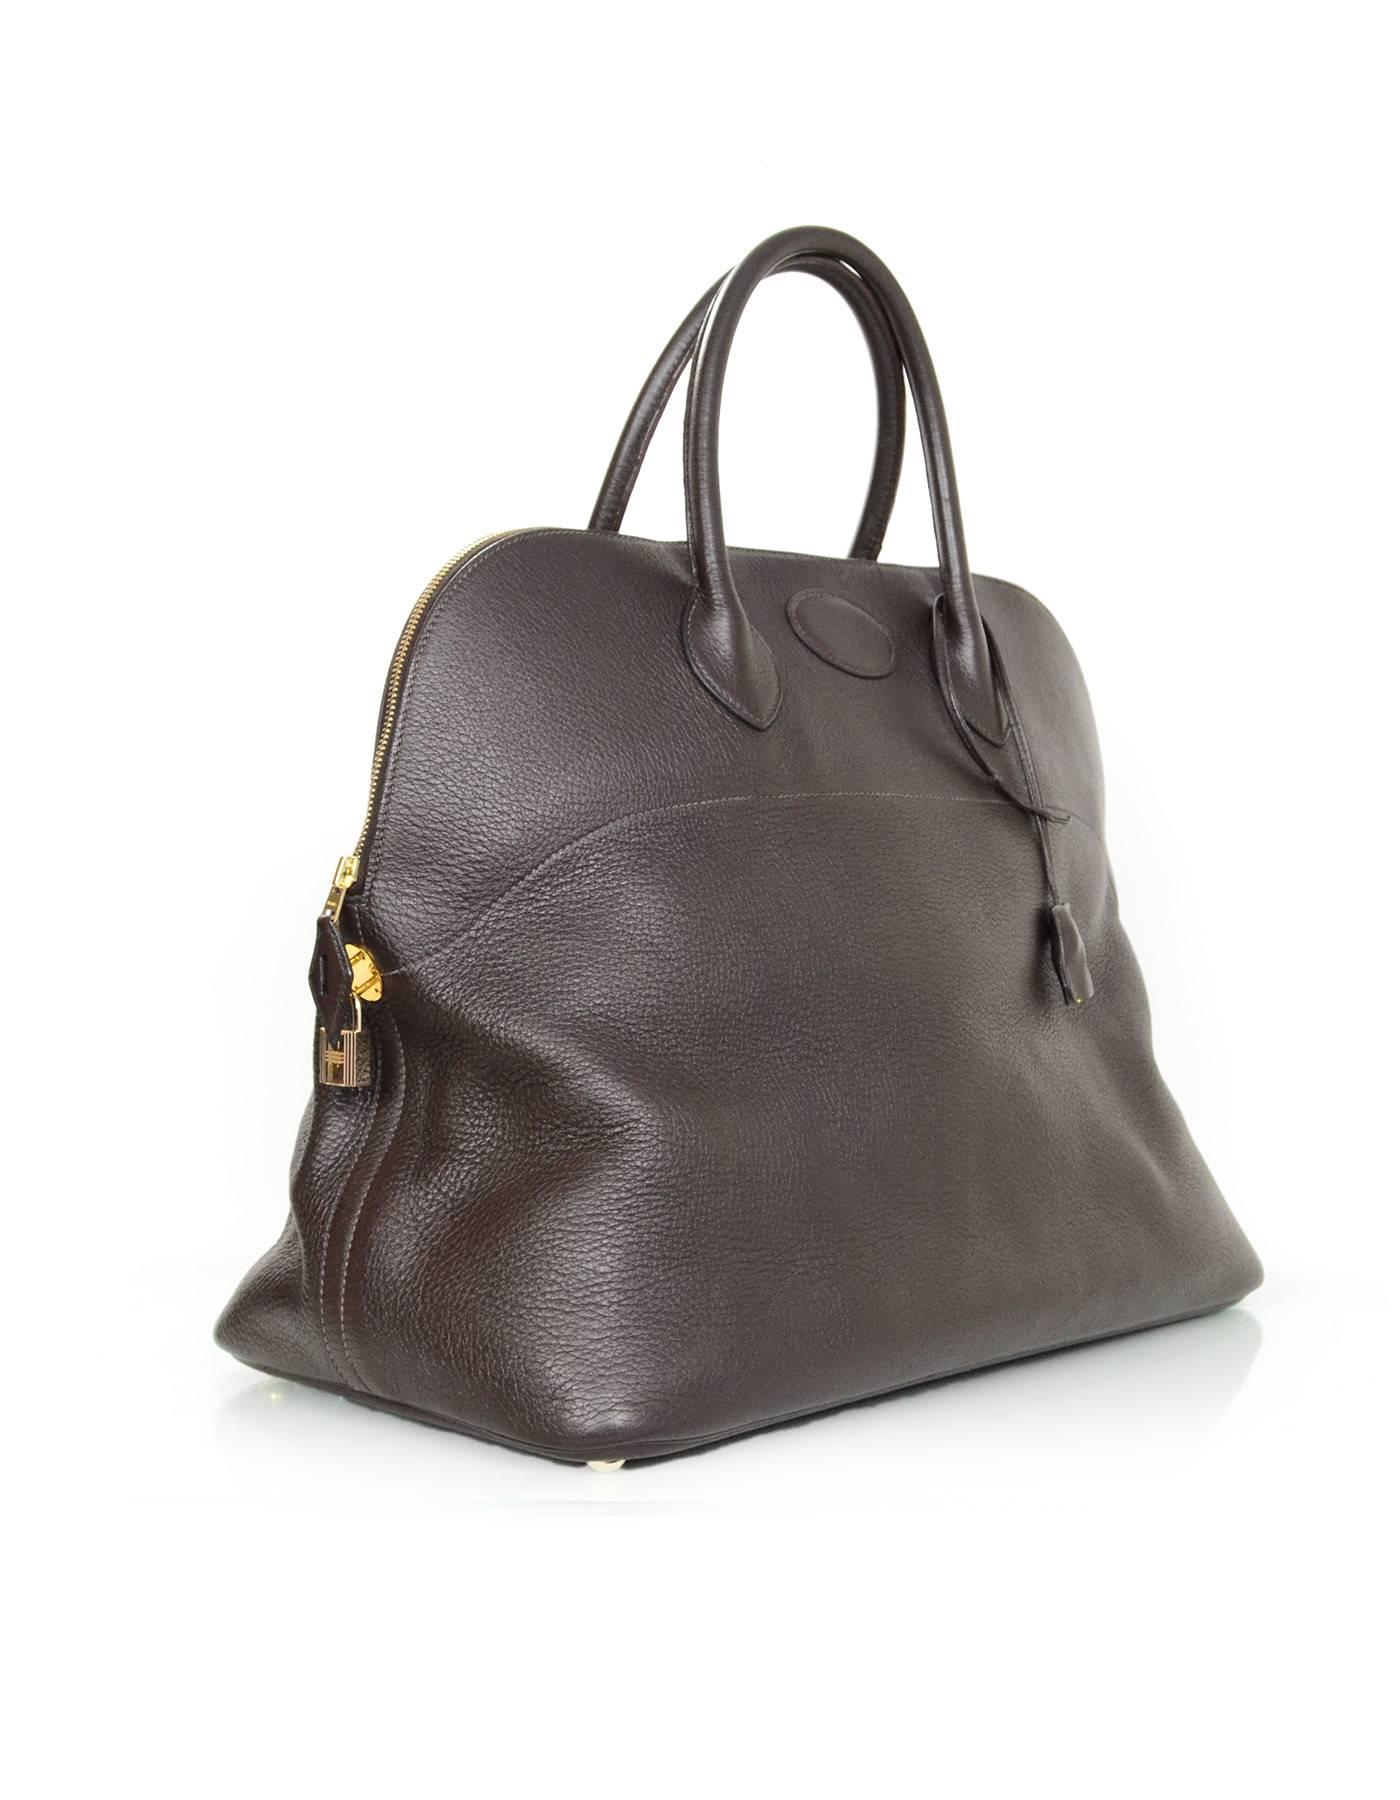 Hermes Brown Clemence 45cm Travel Bolide Bag 

Made In: France
Year of Production: 2004
Color: Brown
Hardware: Goldtone
Materials: Leather
Lining: Brown leather and tan canvas
Closure/Opening: Zip around top
Exterior Pockets: None
Interior Pockets: